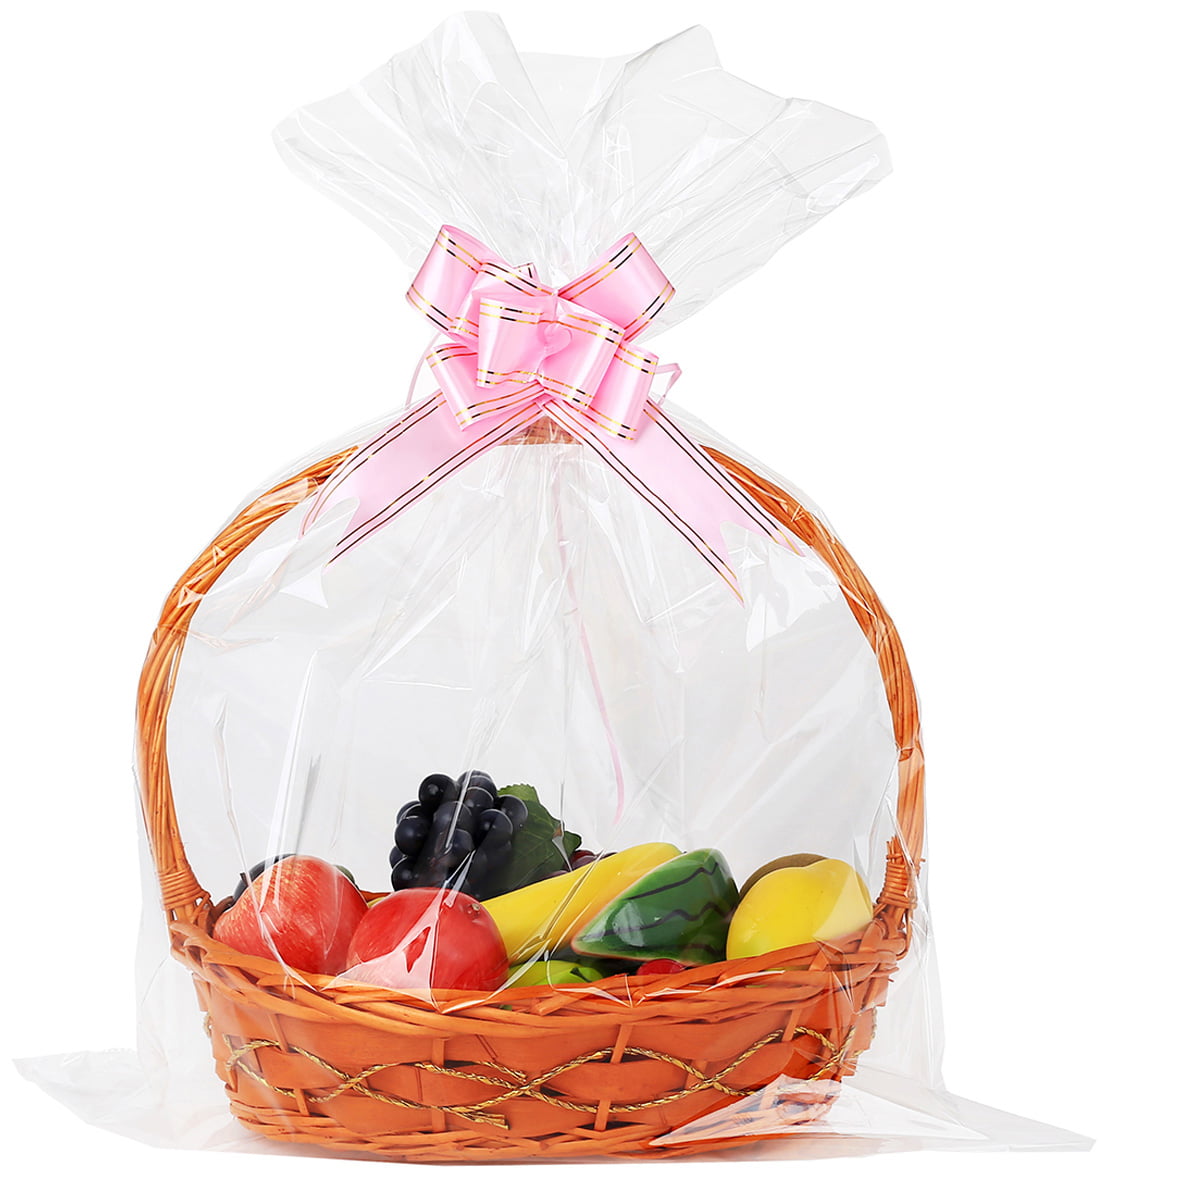 Cellophane Basket Bags Extra Large 20 Pack Cellophane Wrap hamper 40x30 inches 